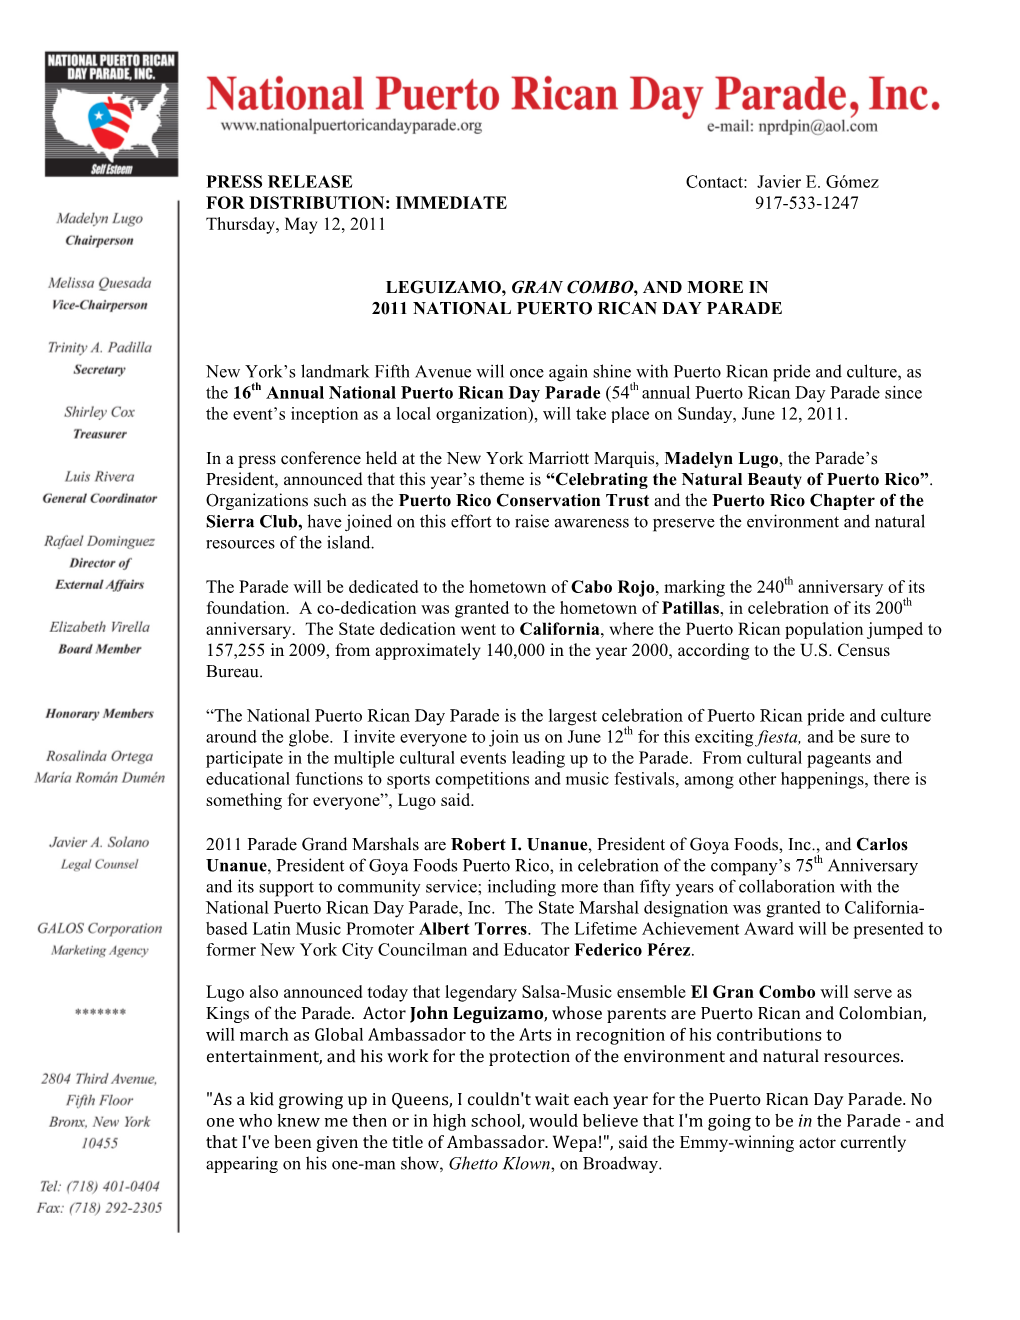 PRESS RELEASE Contact: Javier E. Gómez for DISTRIBUTION: IMMEDIATE 917-533-1247 Thursday, May 12, 2011